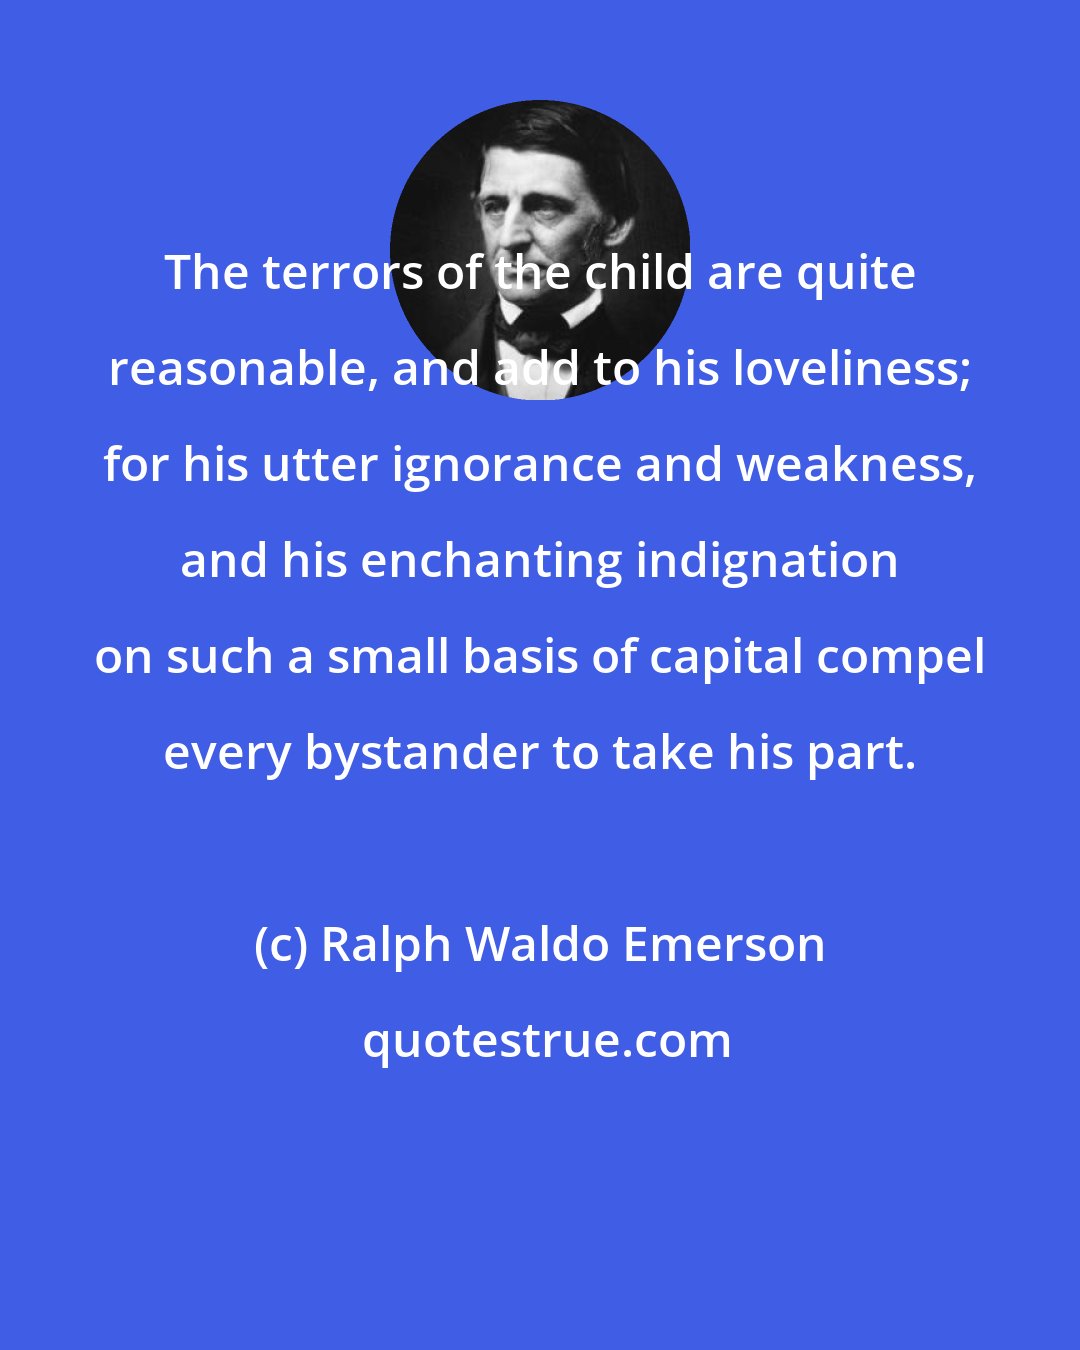 Ralph Waldo Emerson: The terrors of the child are quite reasonable, and add to his loveliness; for his utter ignorance and weakness, and his enchanting indignation on such a small basis of capital compel every bystander to take his part.